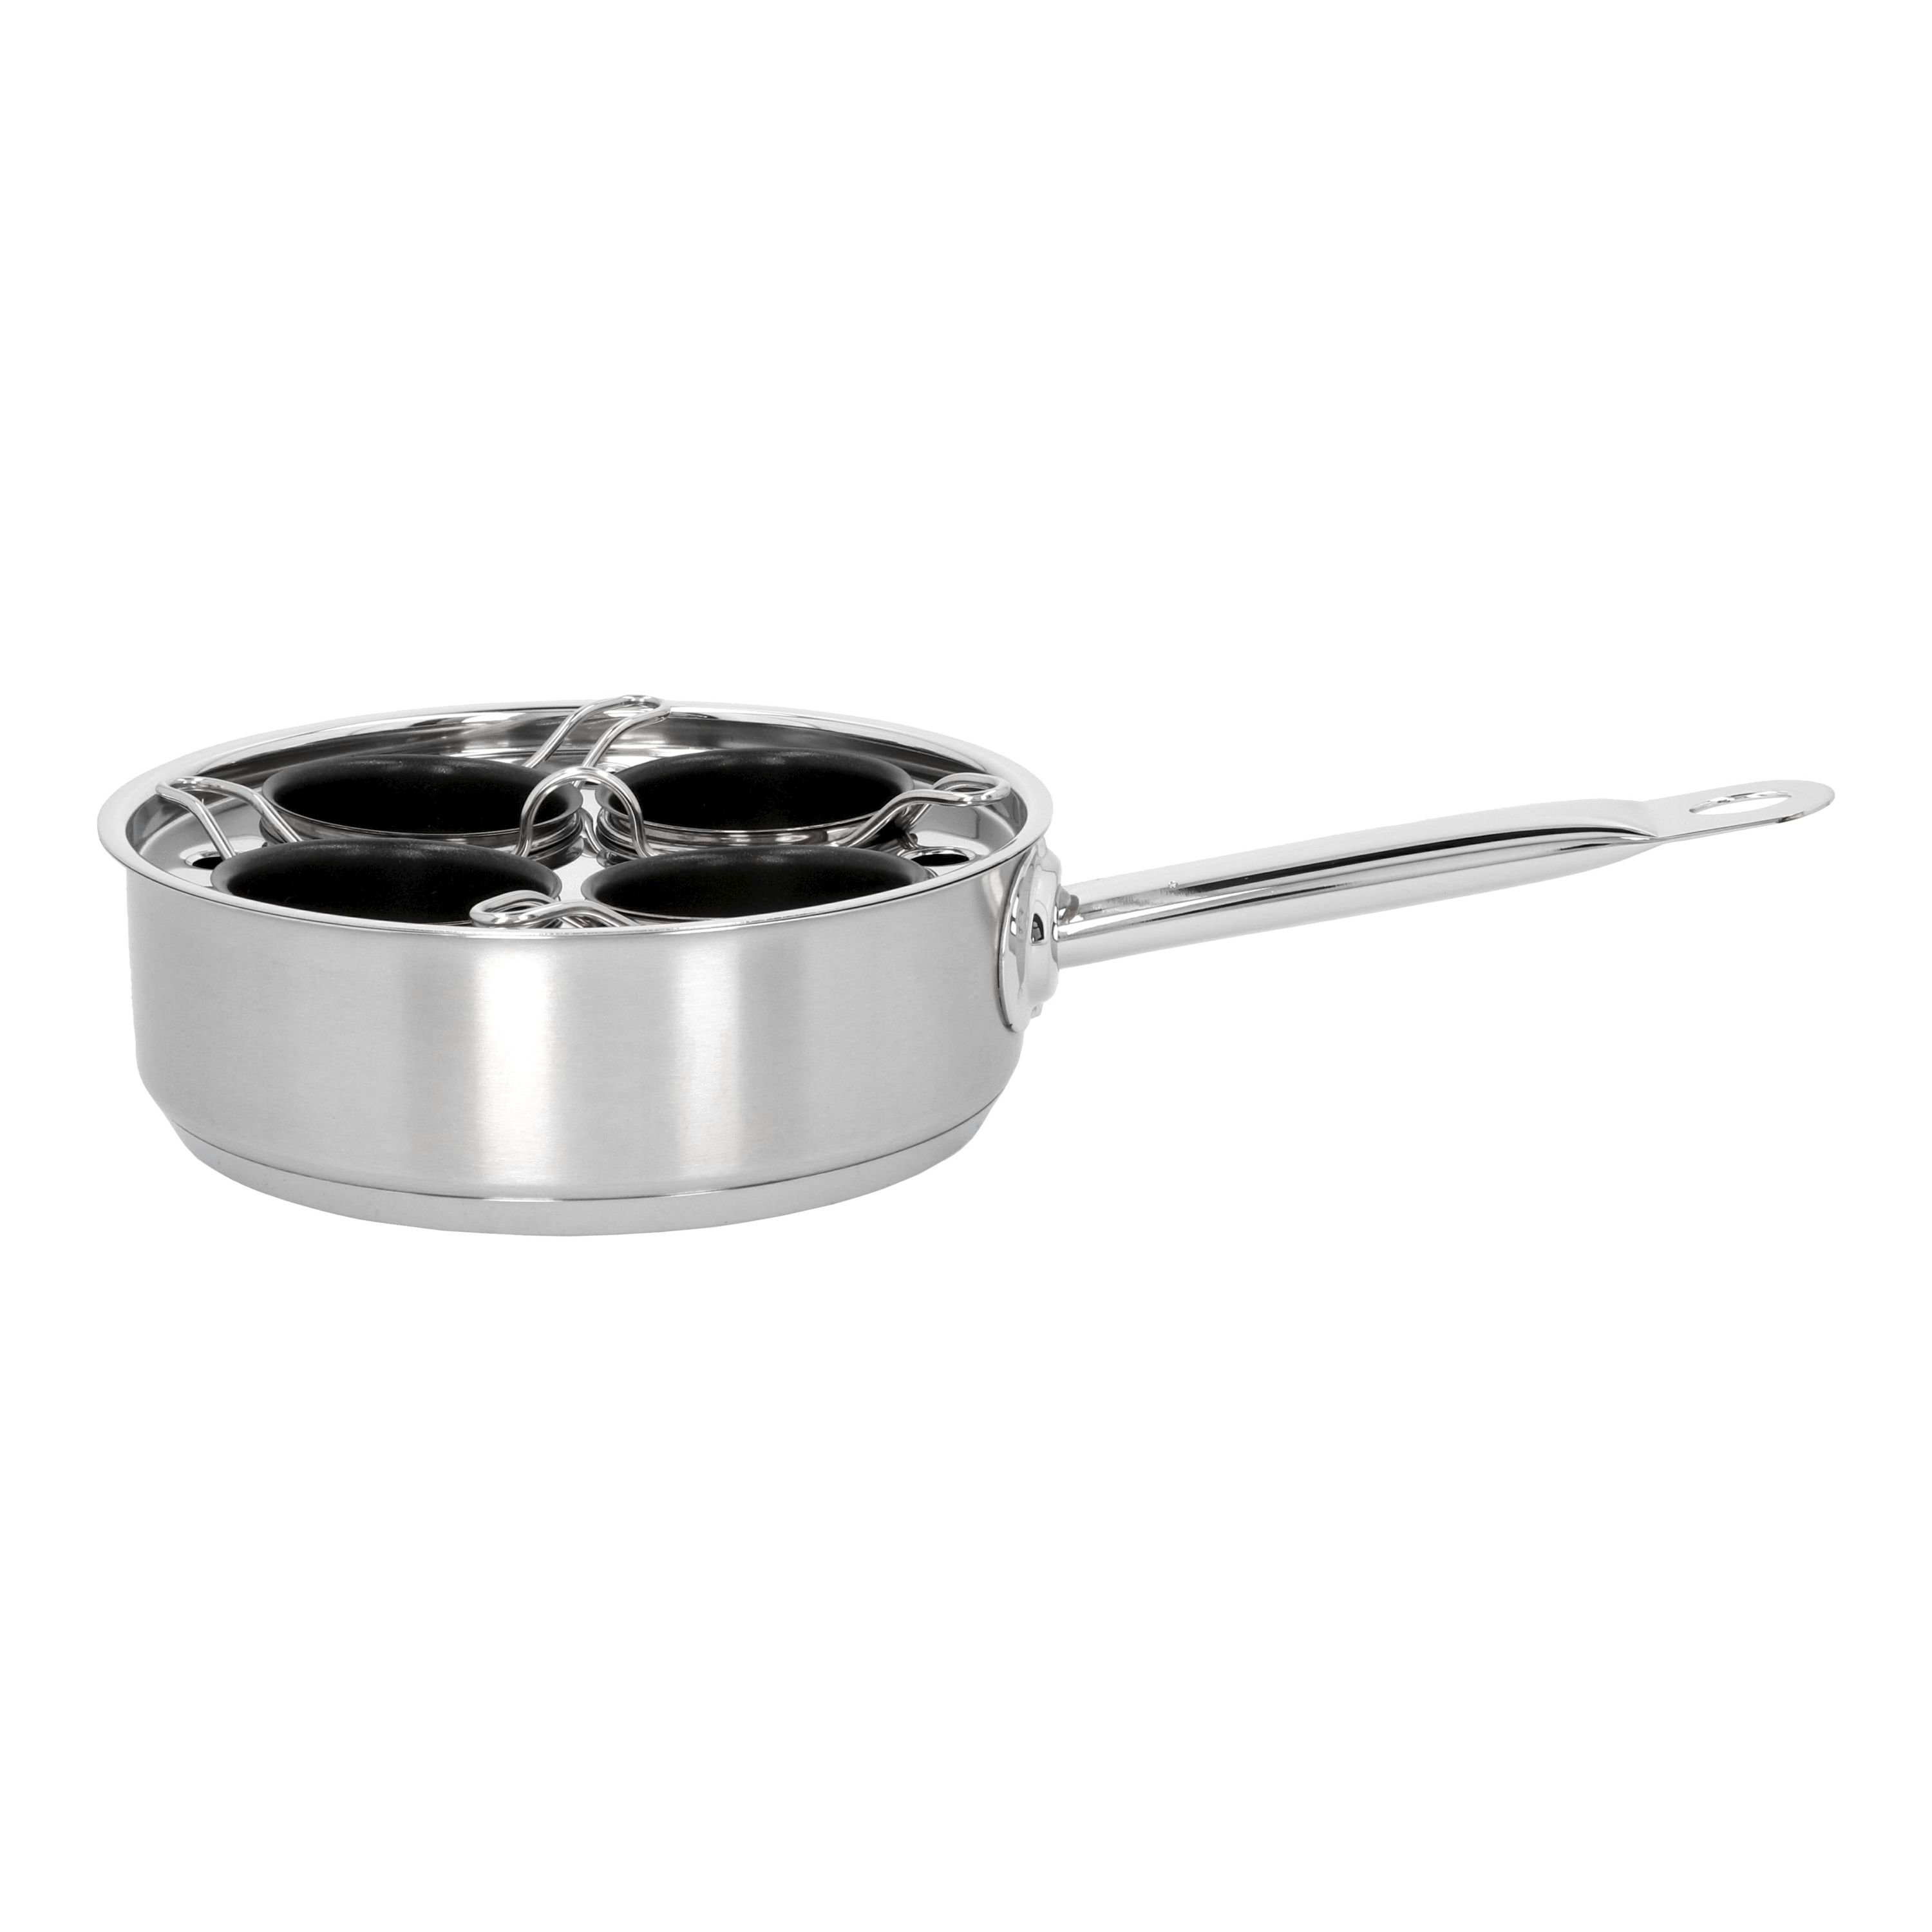 Cook Pro 4 Cup Non Stick Stainless Steel Egg Poacher & Reviews